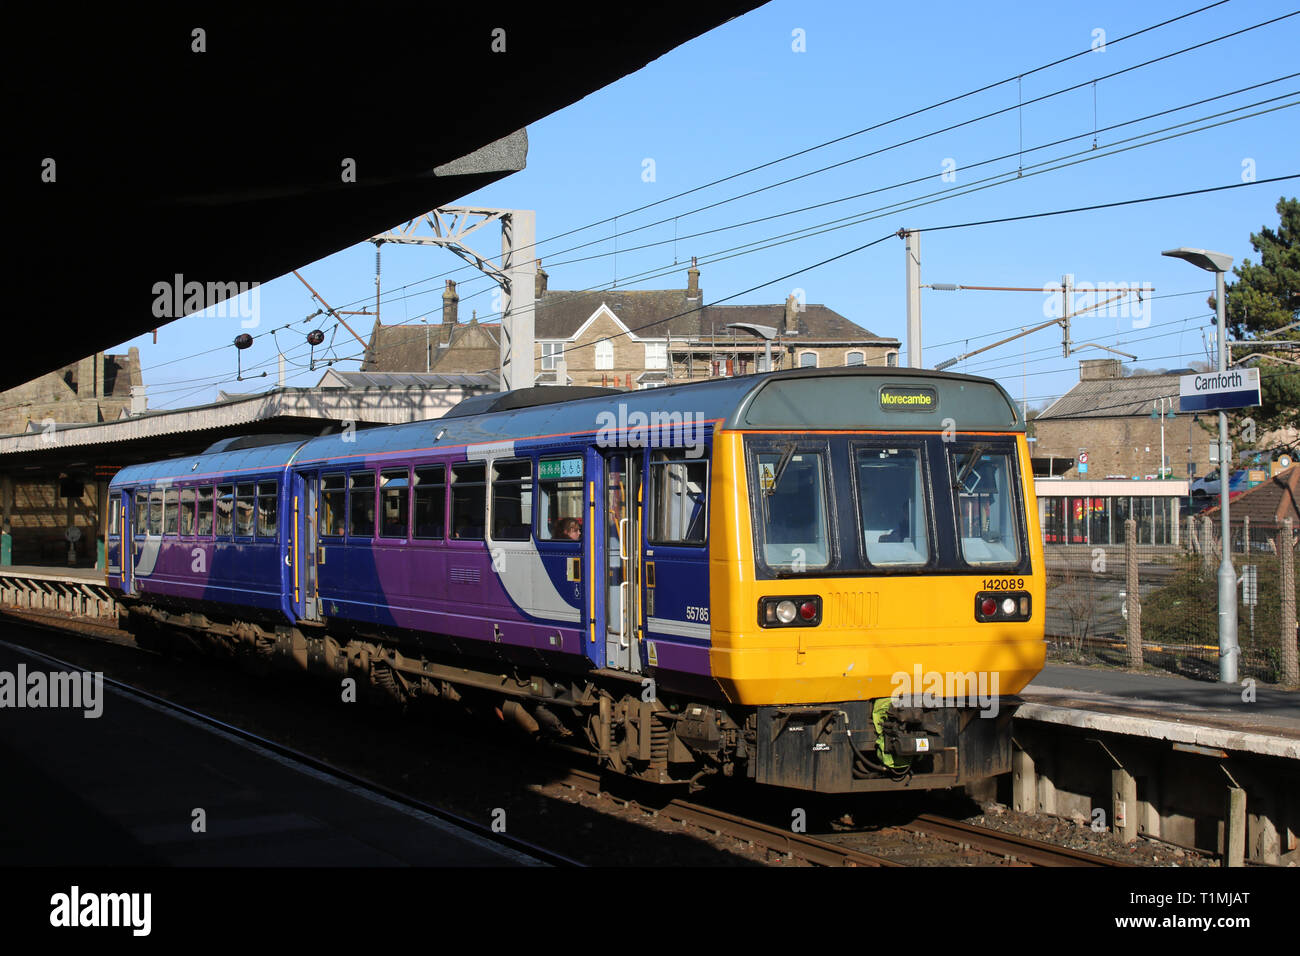 Class 142 Pacer two car diesel multiple unit in Northern livery leaving platform 1 Carnforth station with Leeds to Morecambe train on 25th March 2019. Stock Photo